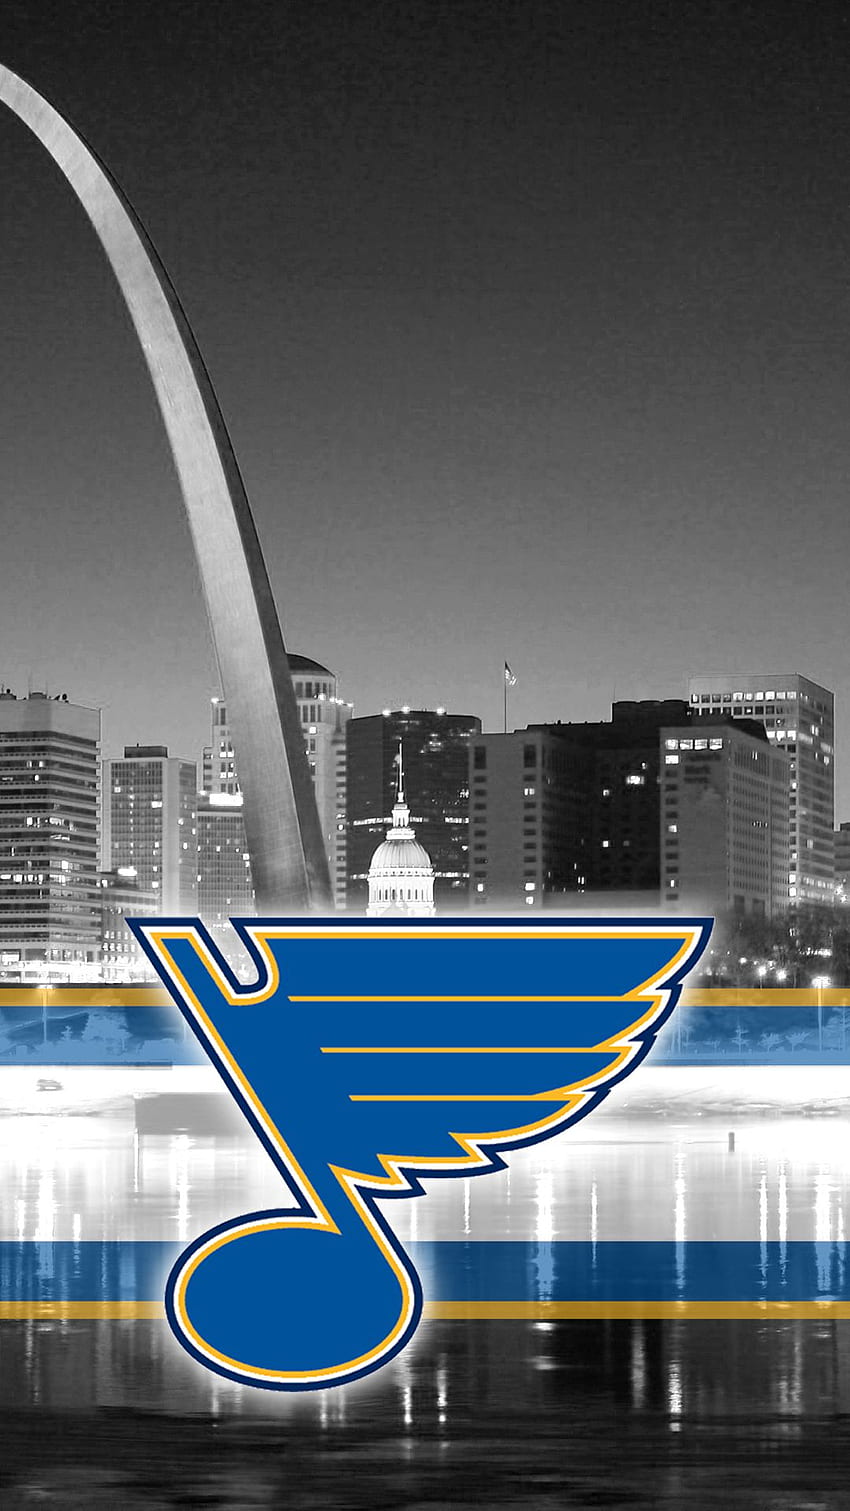 Can never find any blues phone I like, so I made, STL HD phone wallpaper